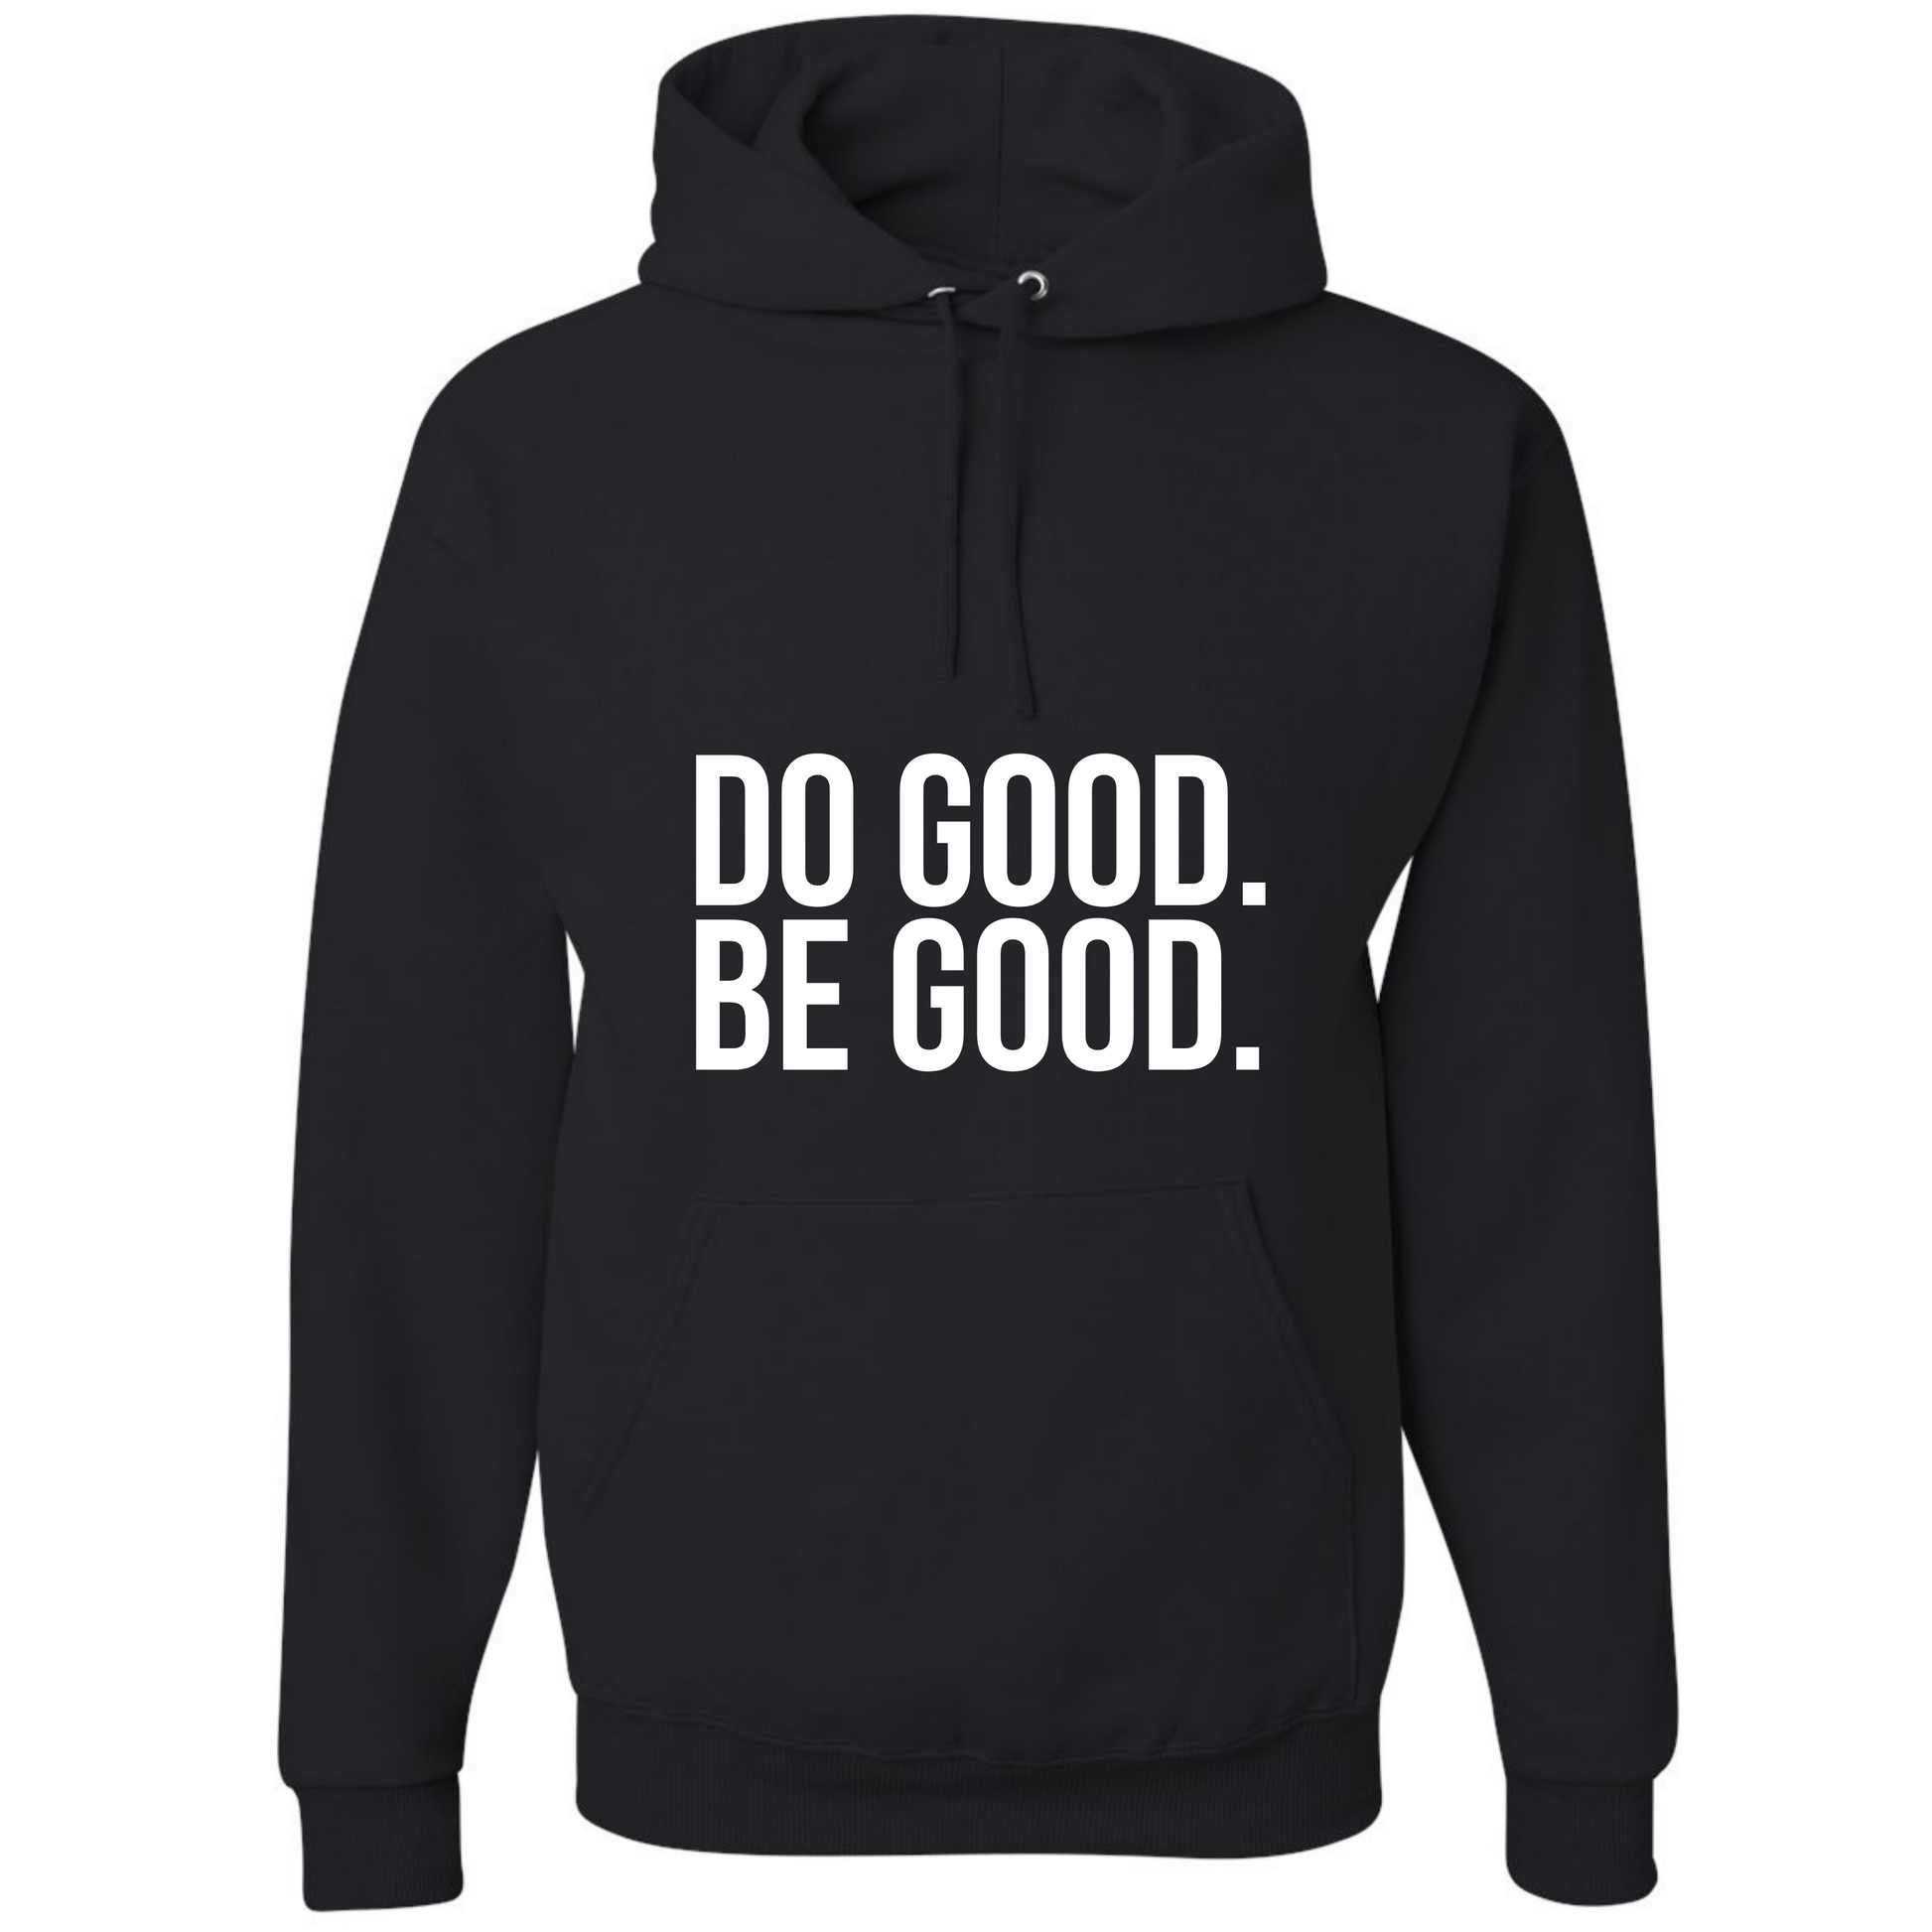 Do Go Be Good affirmation hoodie from Sol Rise Essentials in black/white colors